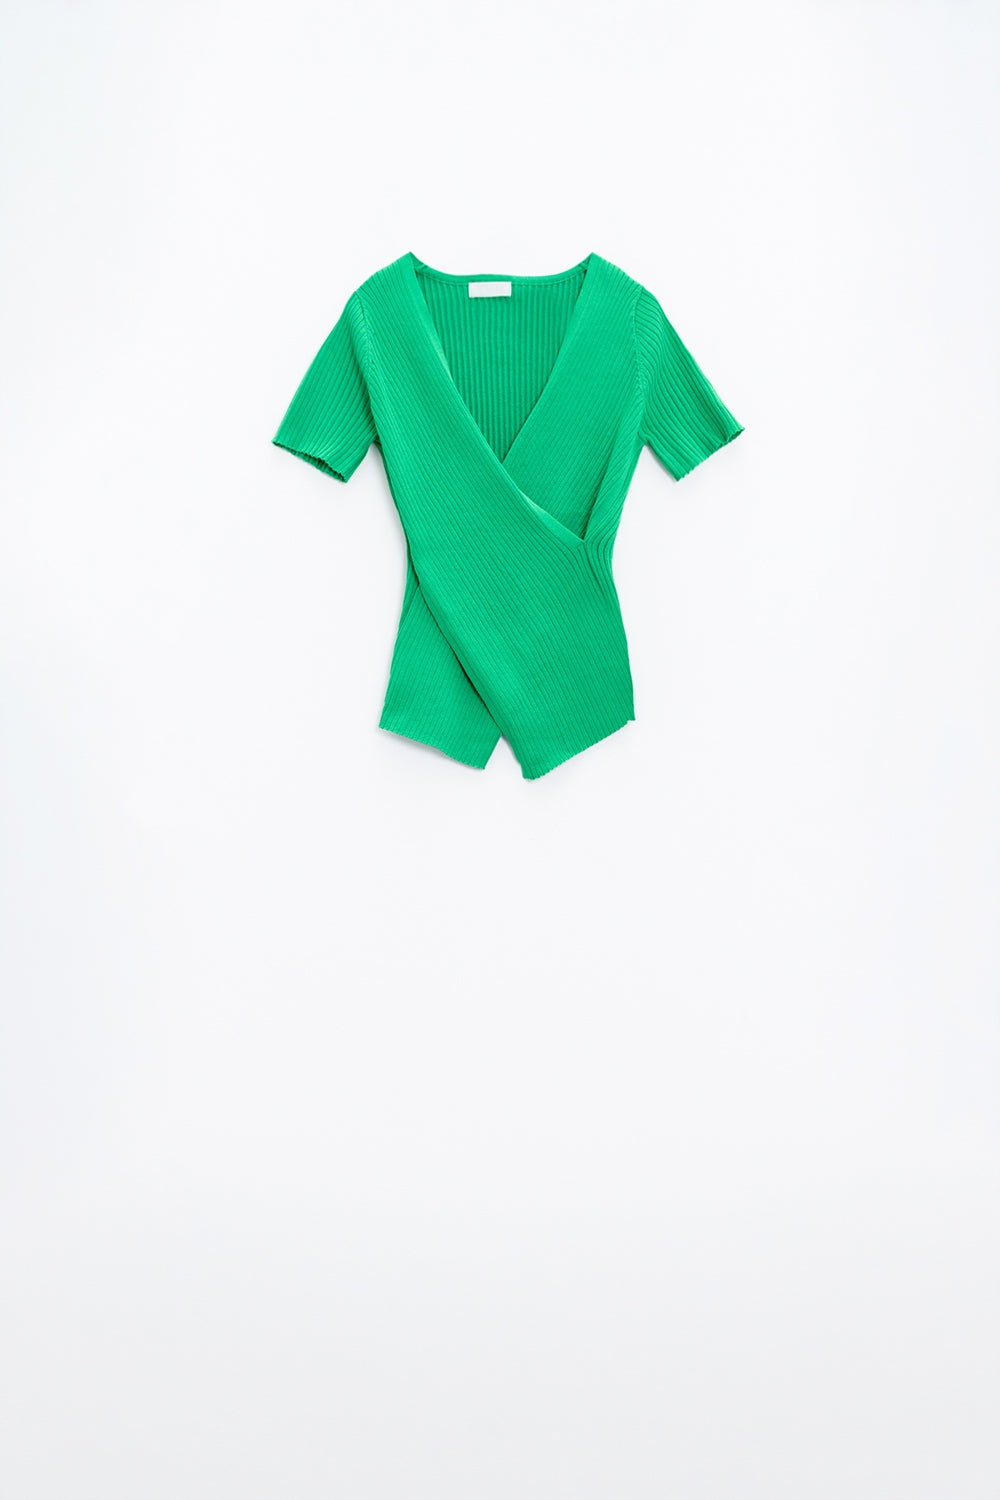 Green V Neck Shirt with Crossed Front